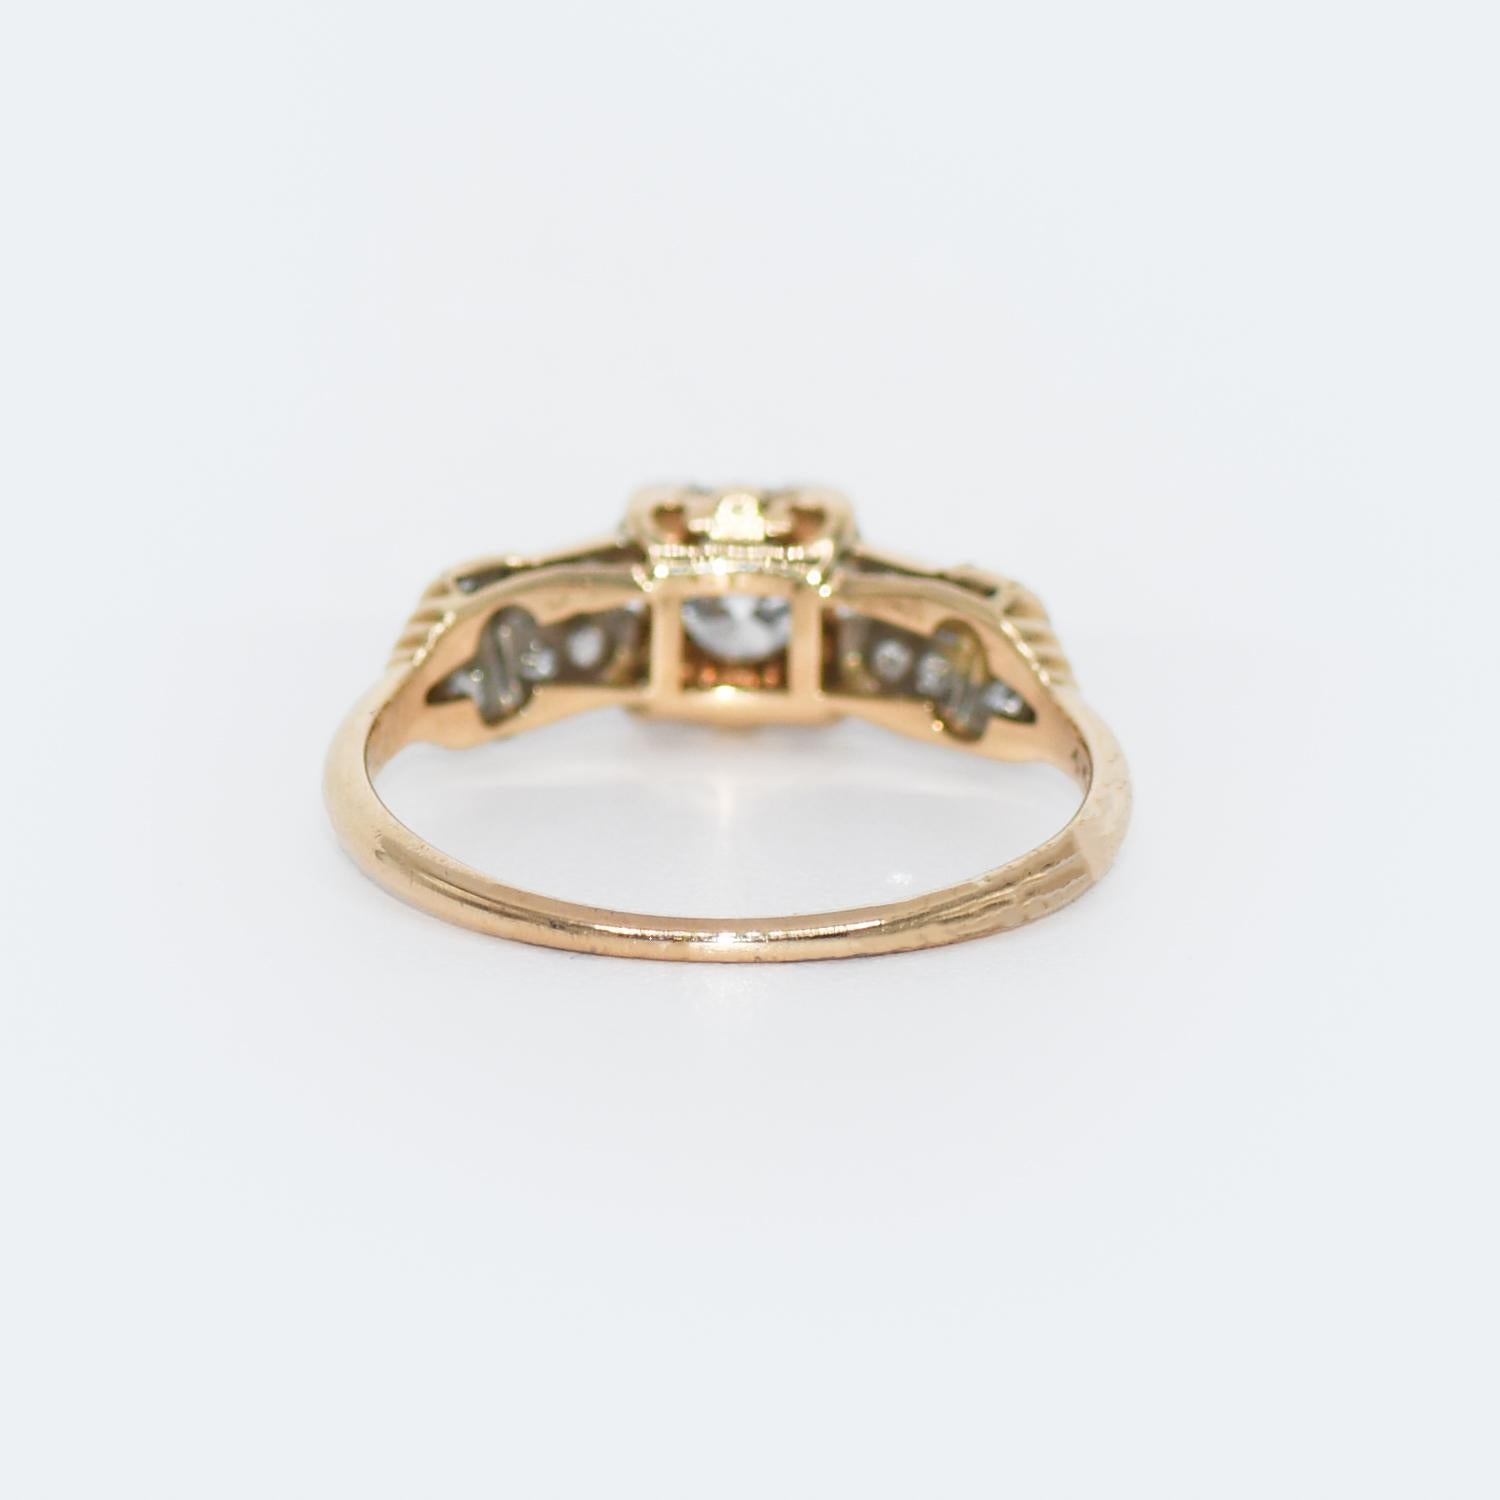 18k Yellow Gold 0.54ct Diamond Art Deco Engagement Ring, Size 6.5 In Excellent Condition For Sale In Laguna Beach, CA